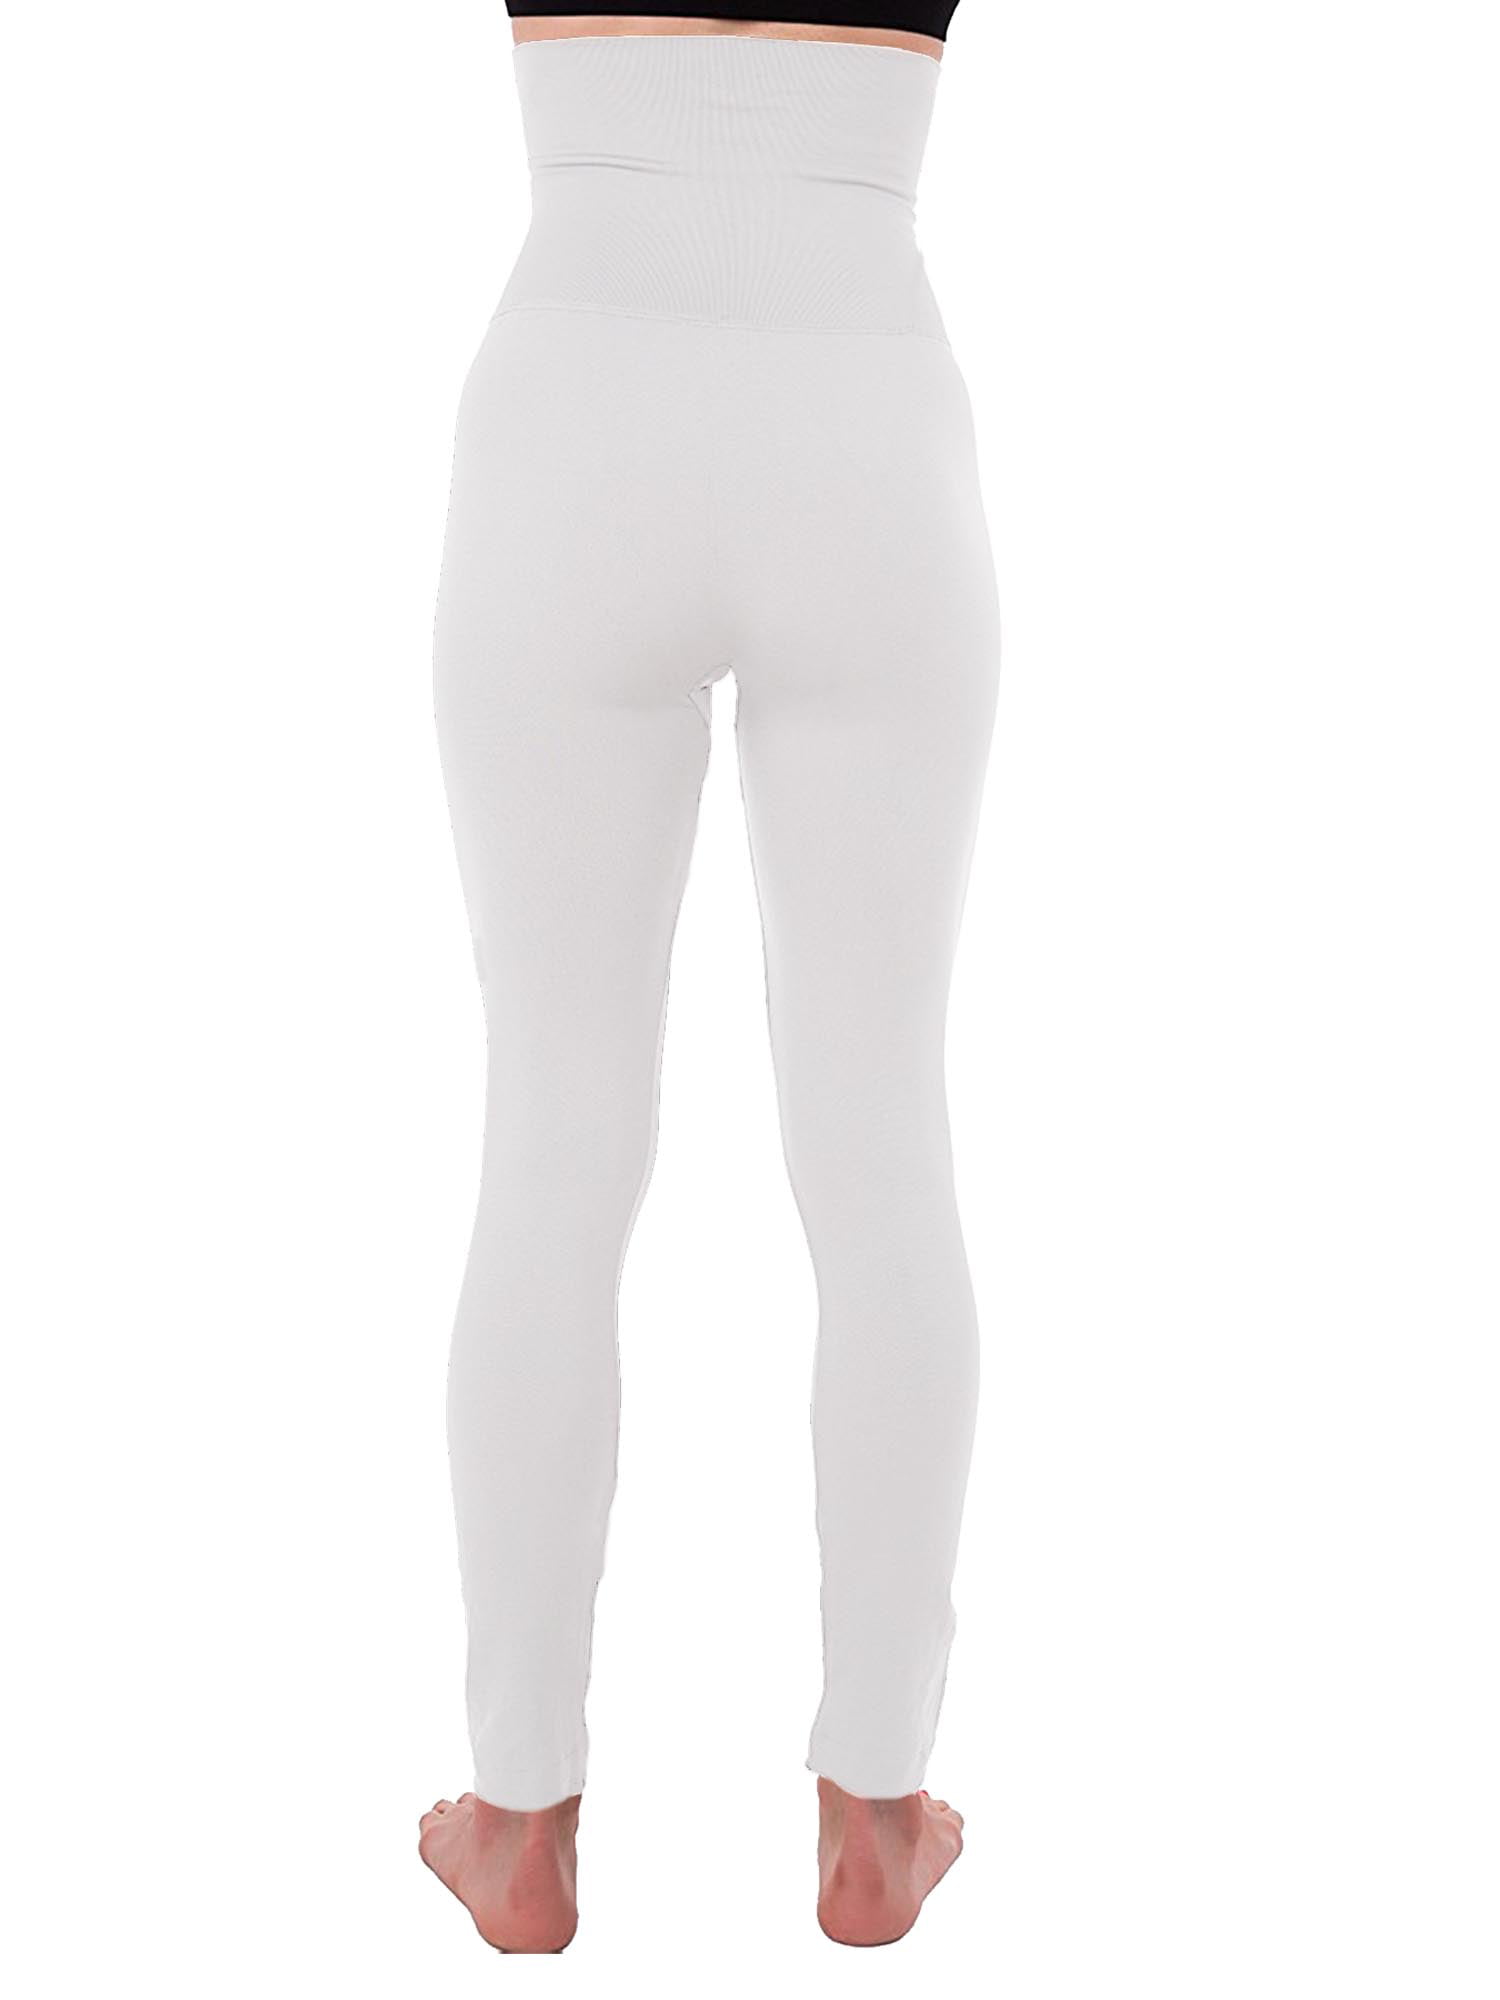 90 Degree By Reflex High Waist Fleece Lined Leggings with Side Pocket -  Yoga Pants - White Surf Space Dye - XL in Oman